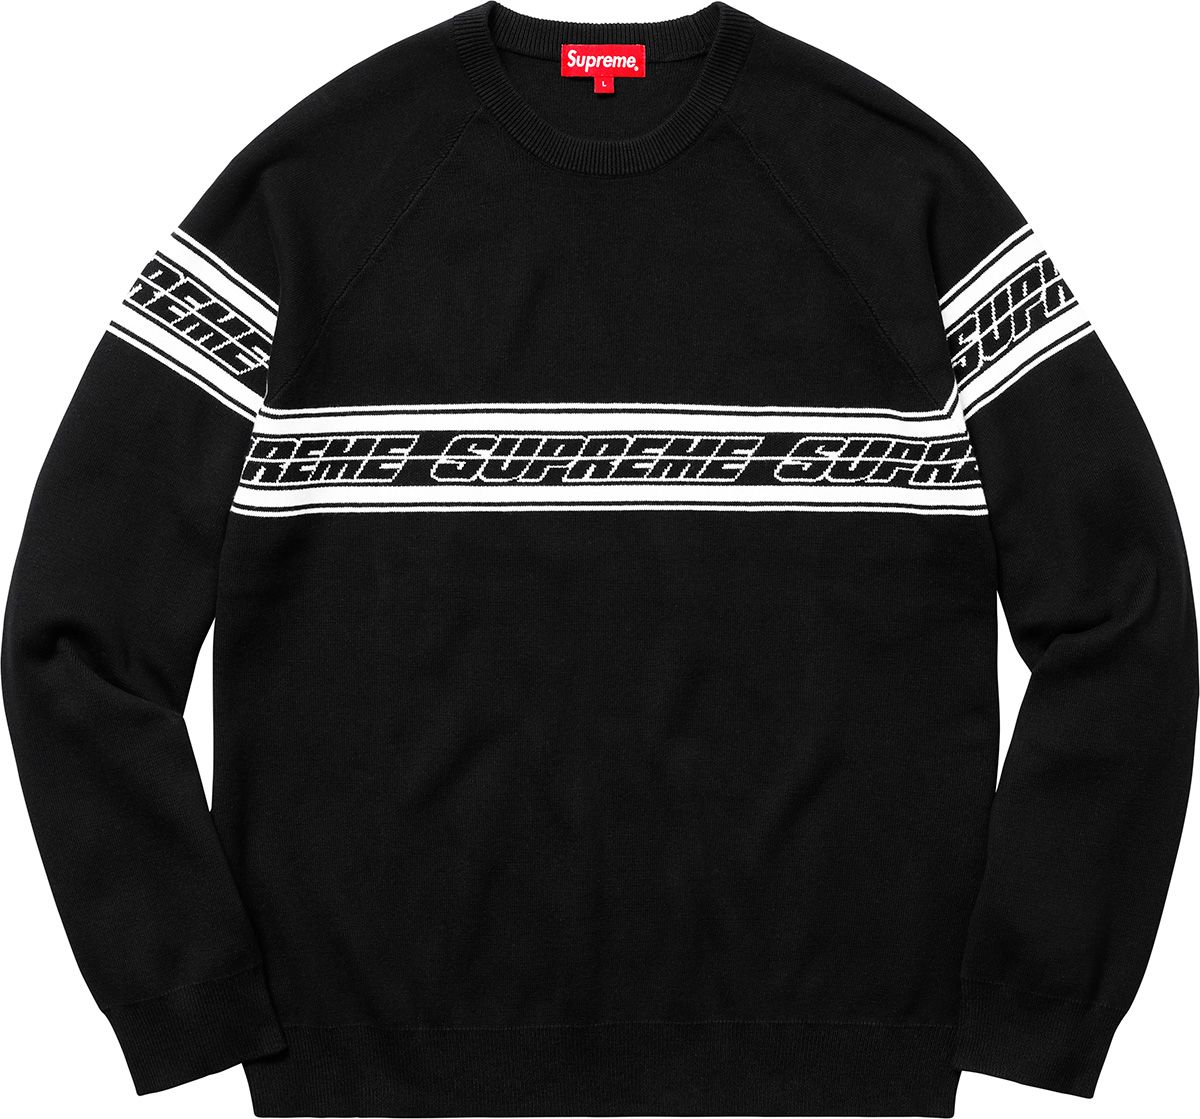 Bandana Sweater - Spring/Summer 2018 Preview – Supreme